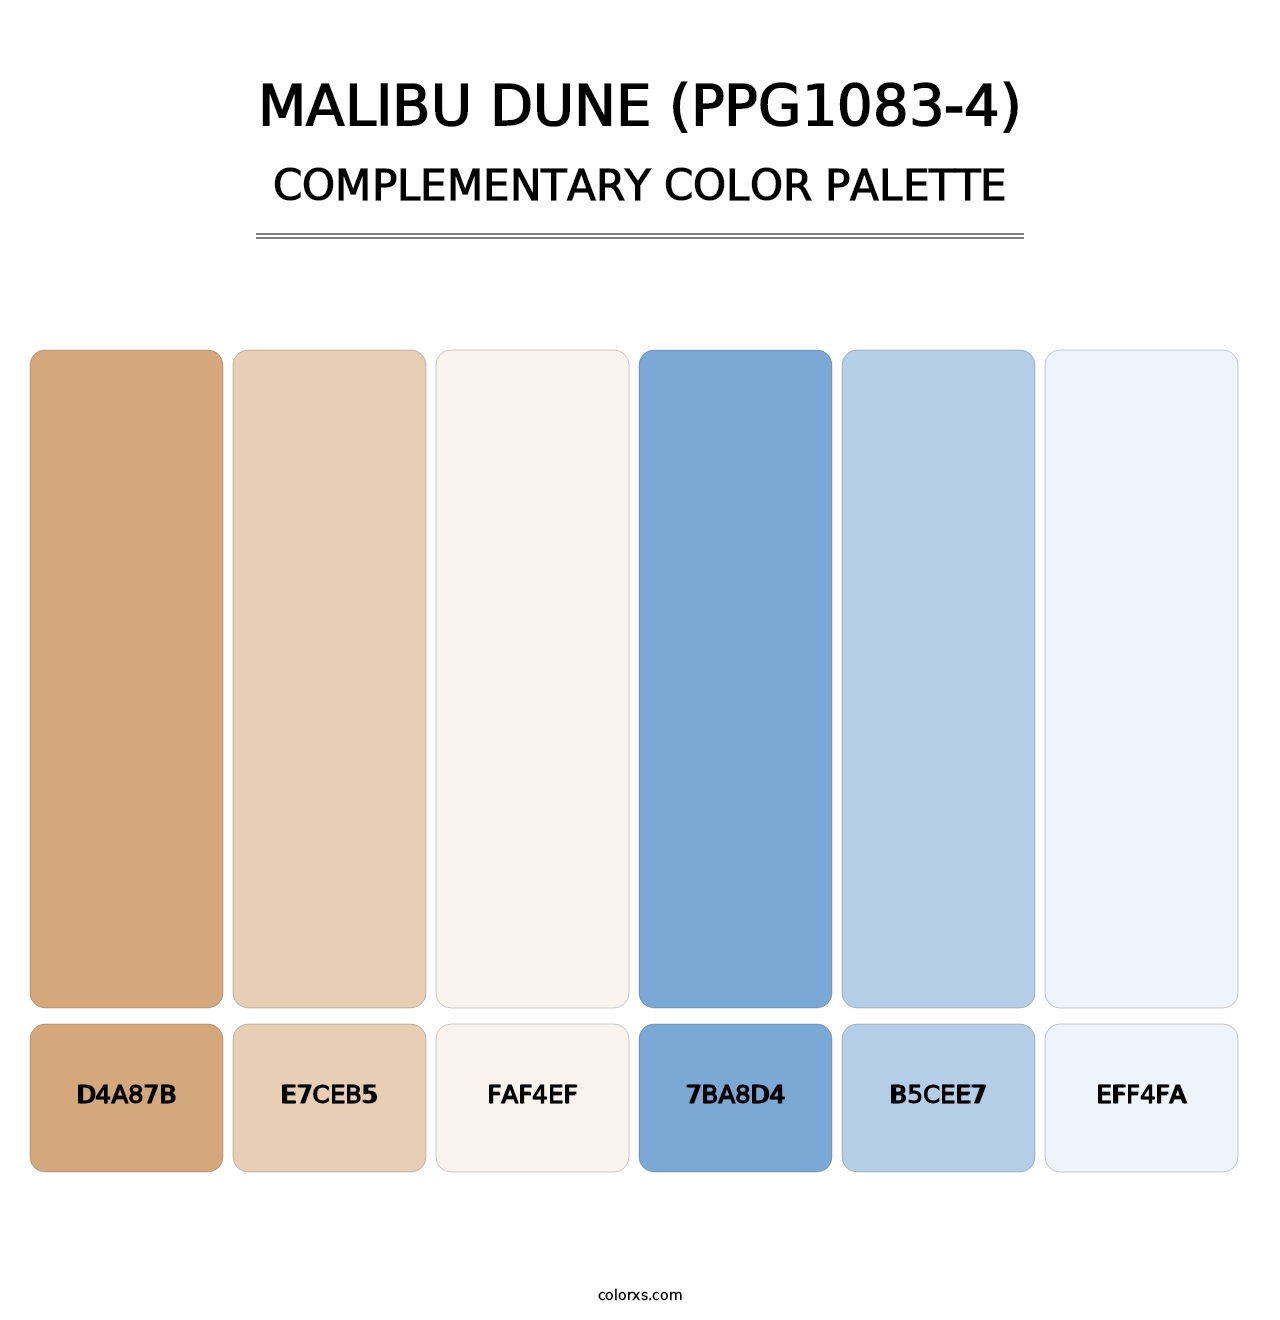 Malibu Dune (PPG1083-4) - Complementary Color Palette